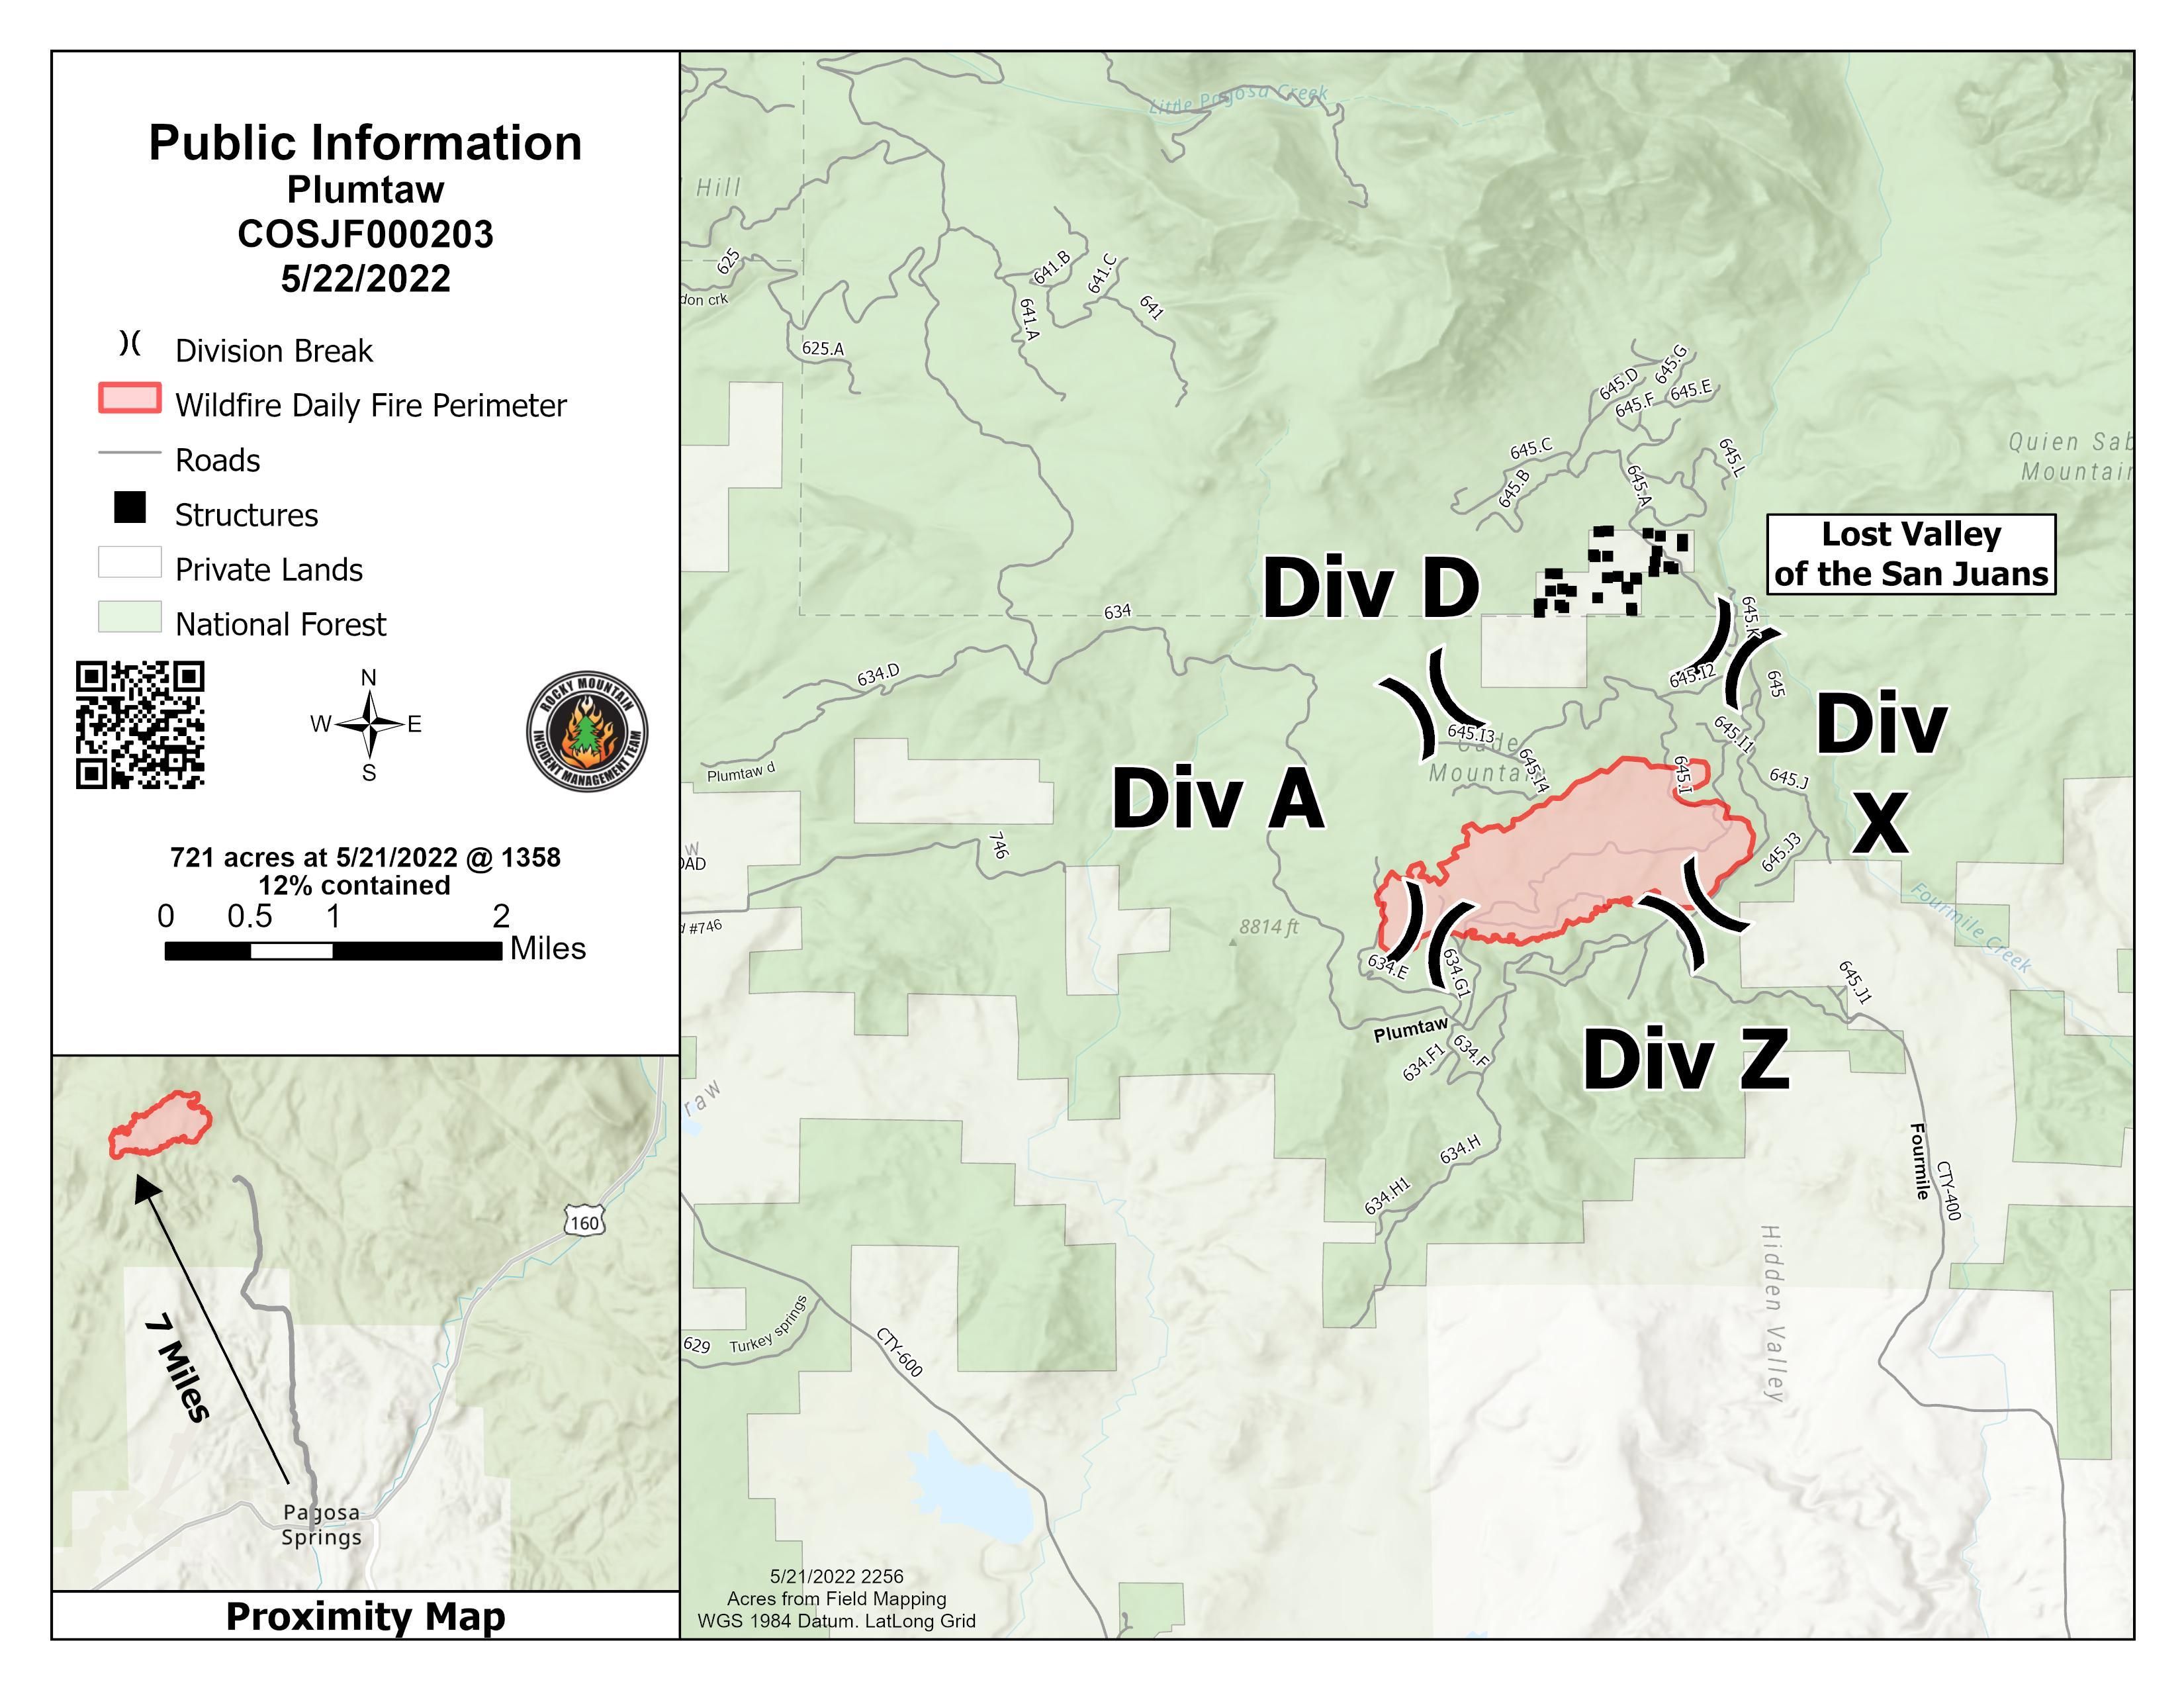 Map of Plumtaw Fire for May 22